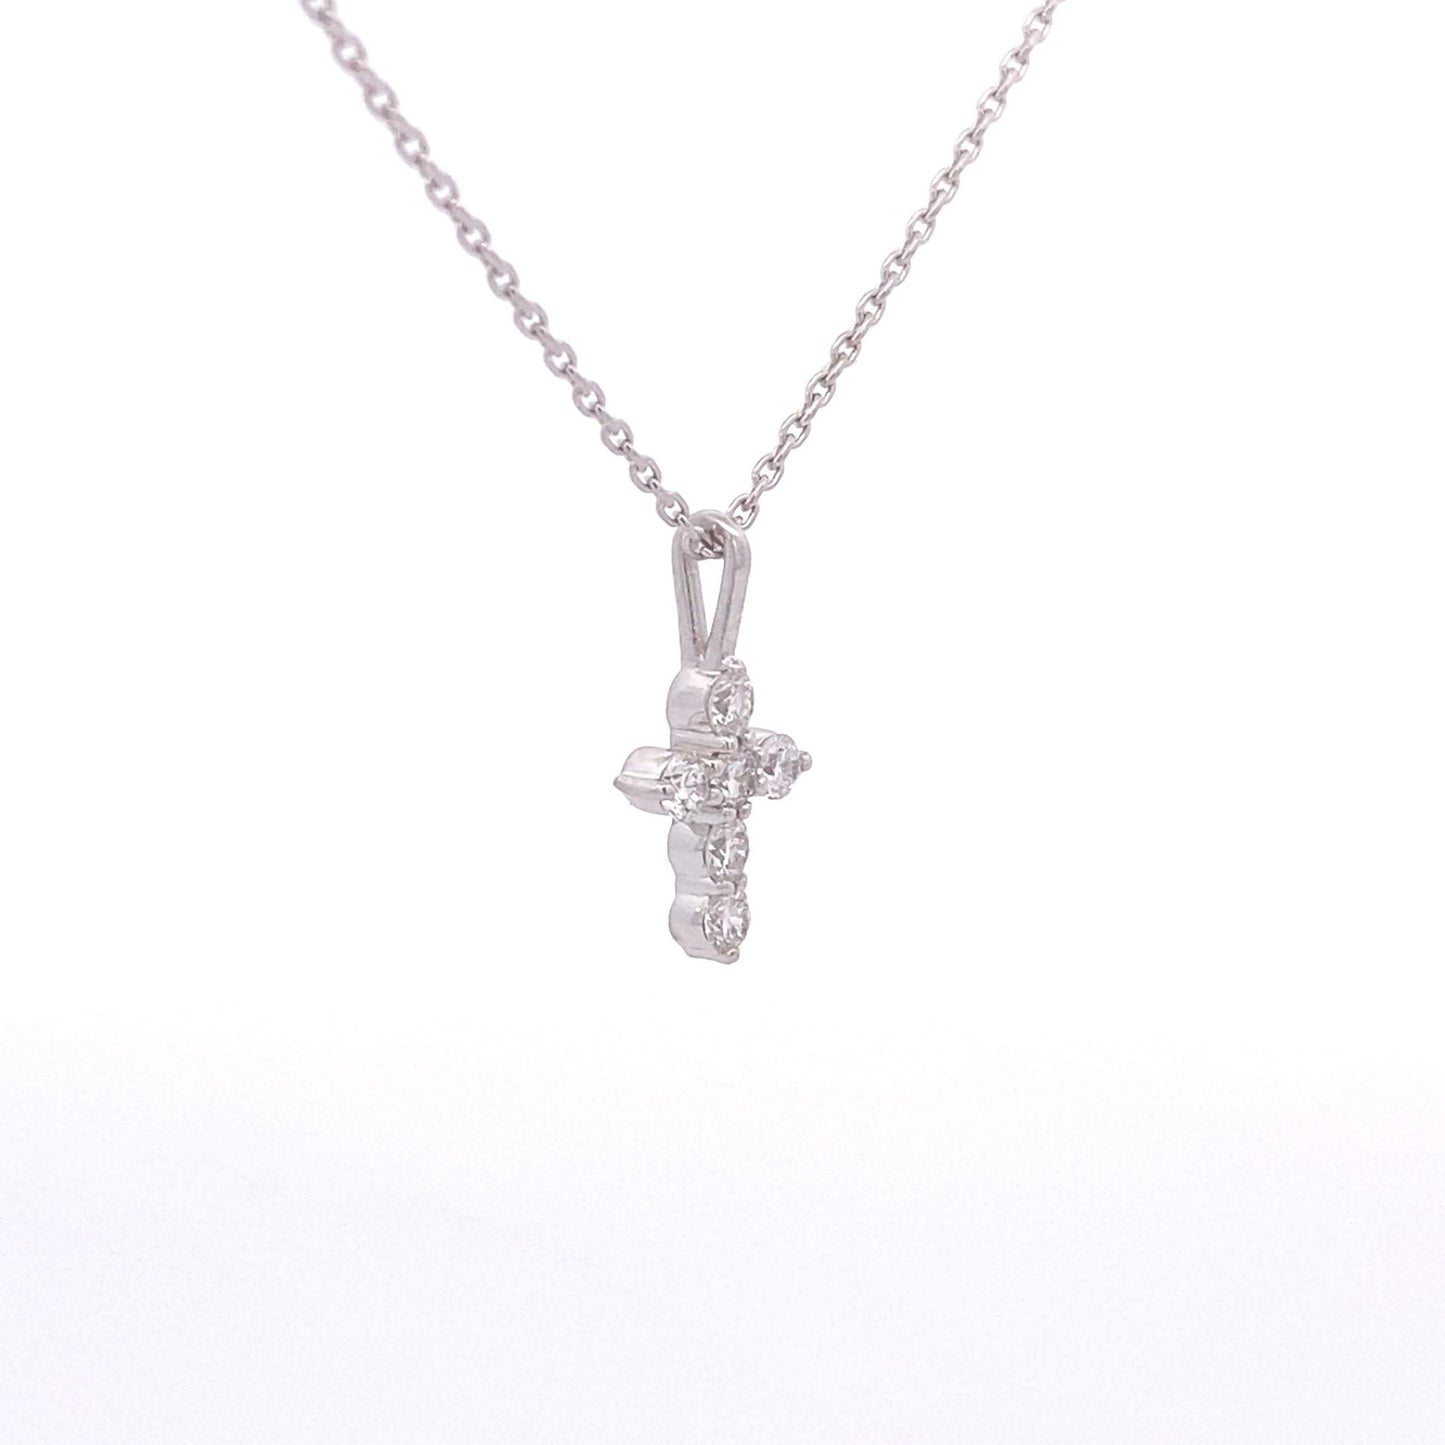 Necklace 14kt white gold Diamond Cross Necklace with 18" cable chain - Gaines Jewelers